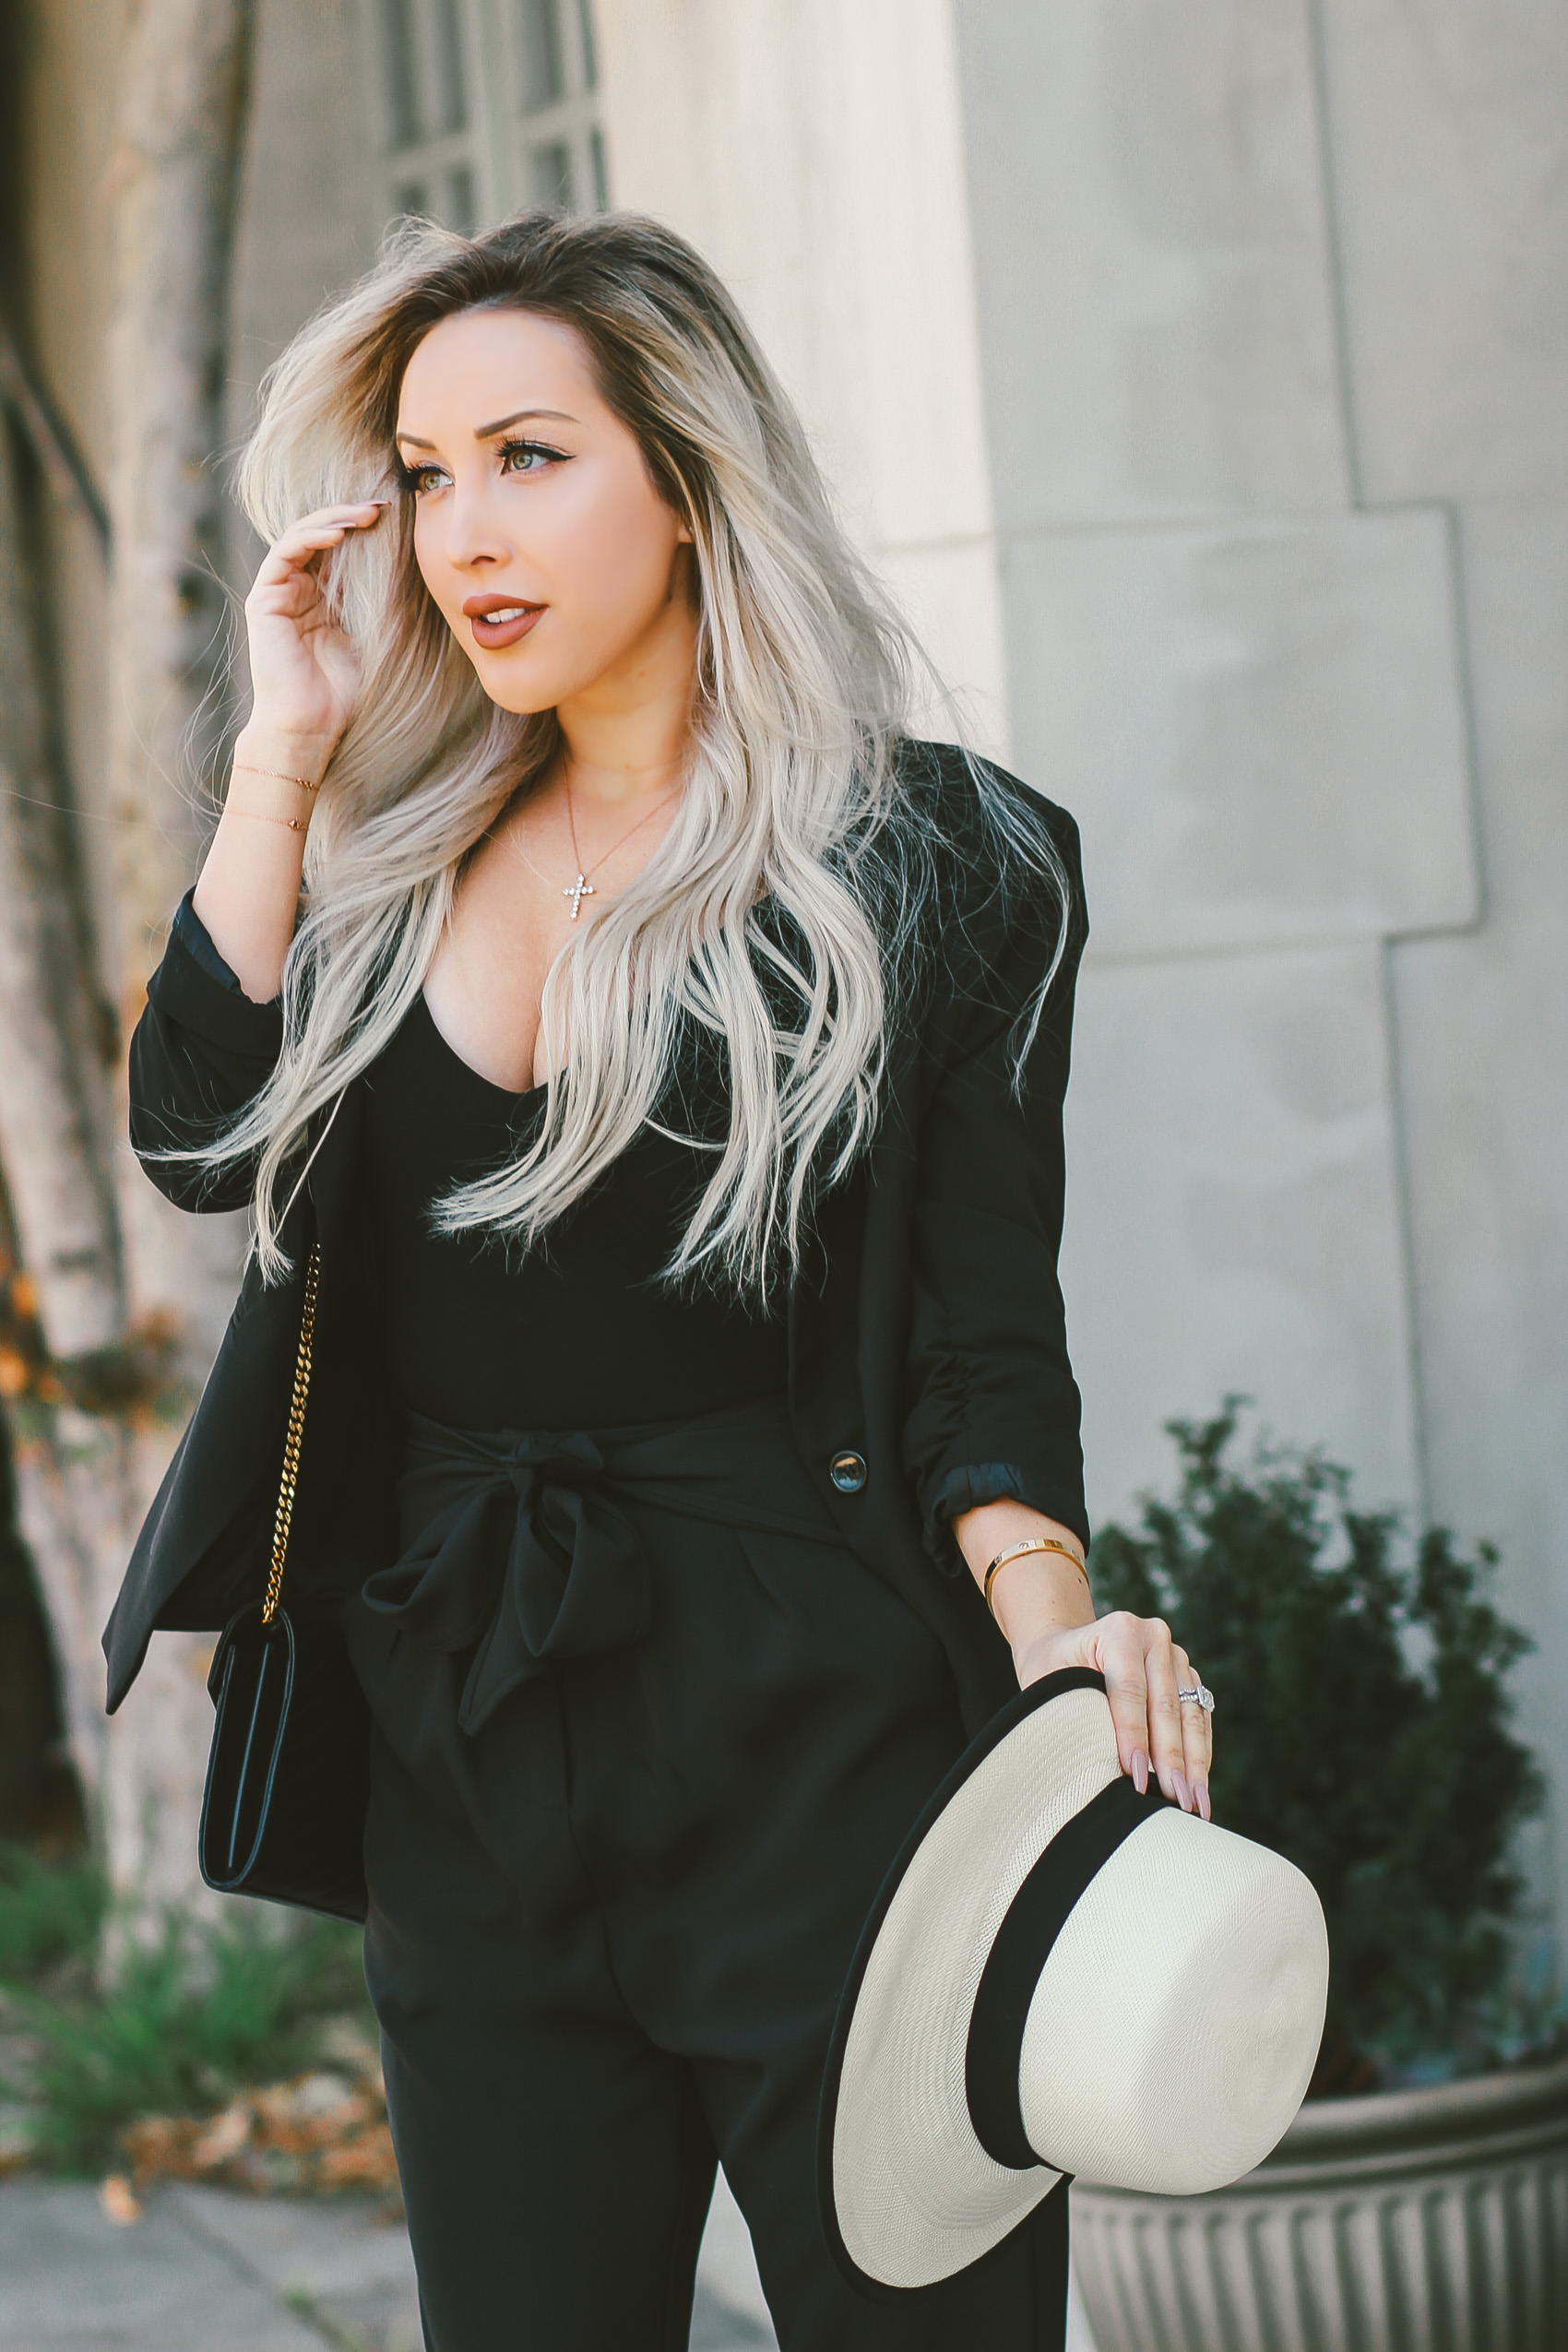 Panama Hat @galponco | All Black with Nude Louboutin's | Black YSL Bag | Blondie in the City by Hayley Larue